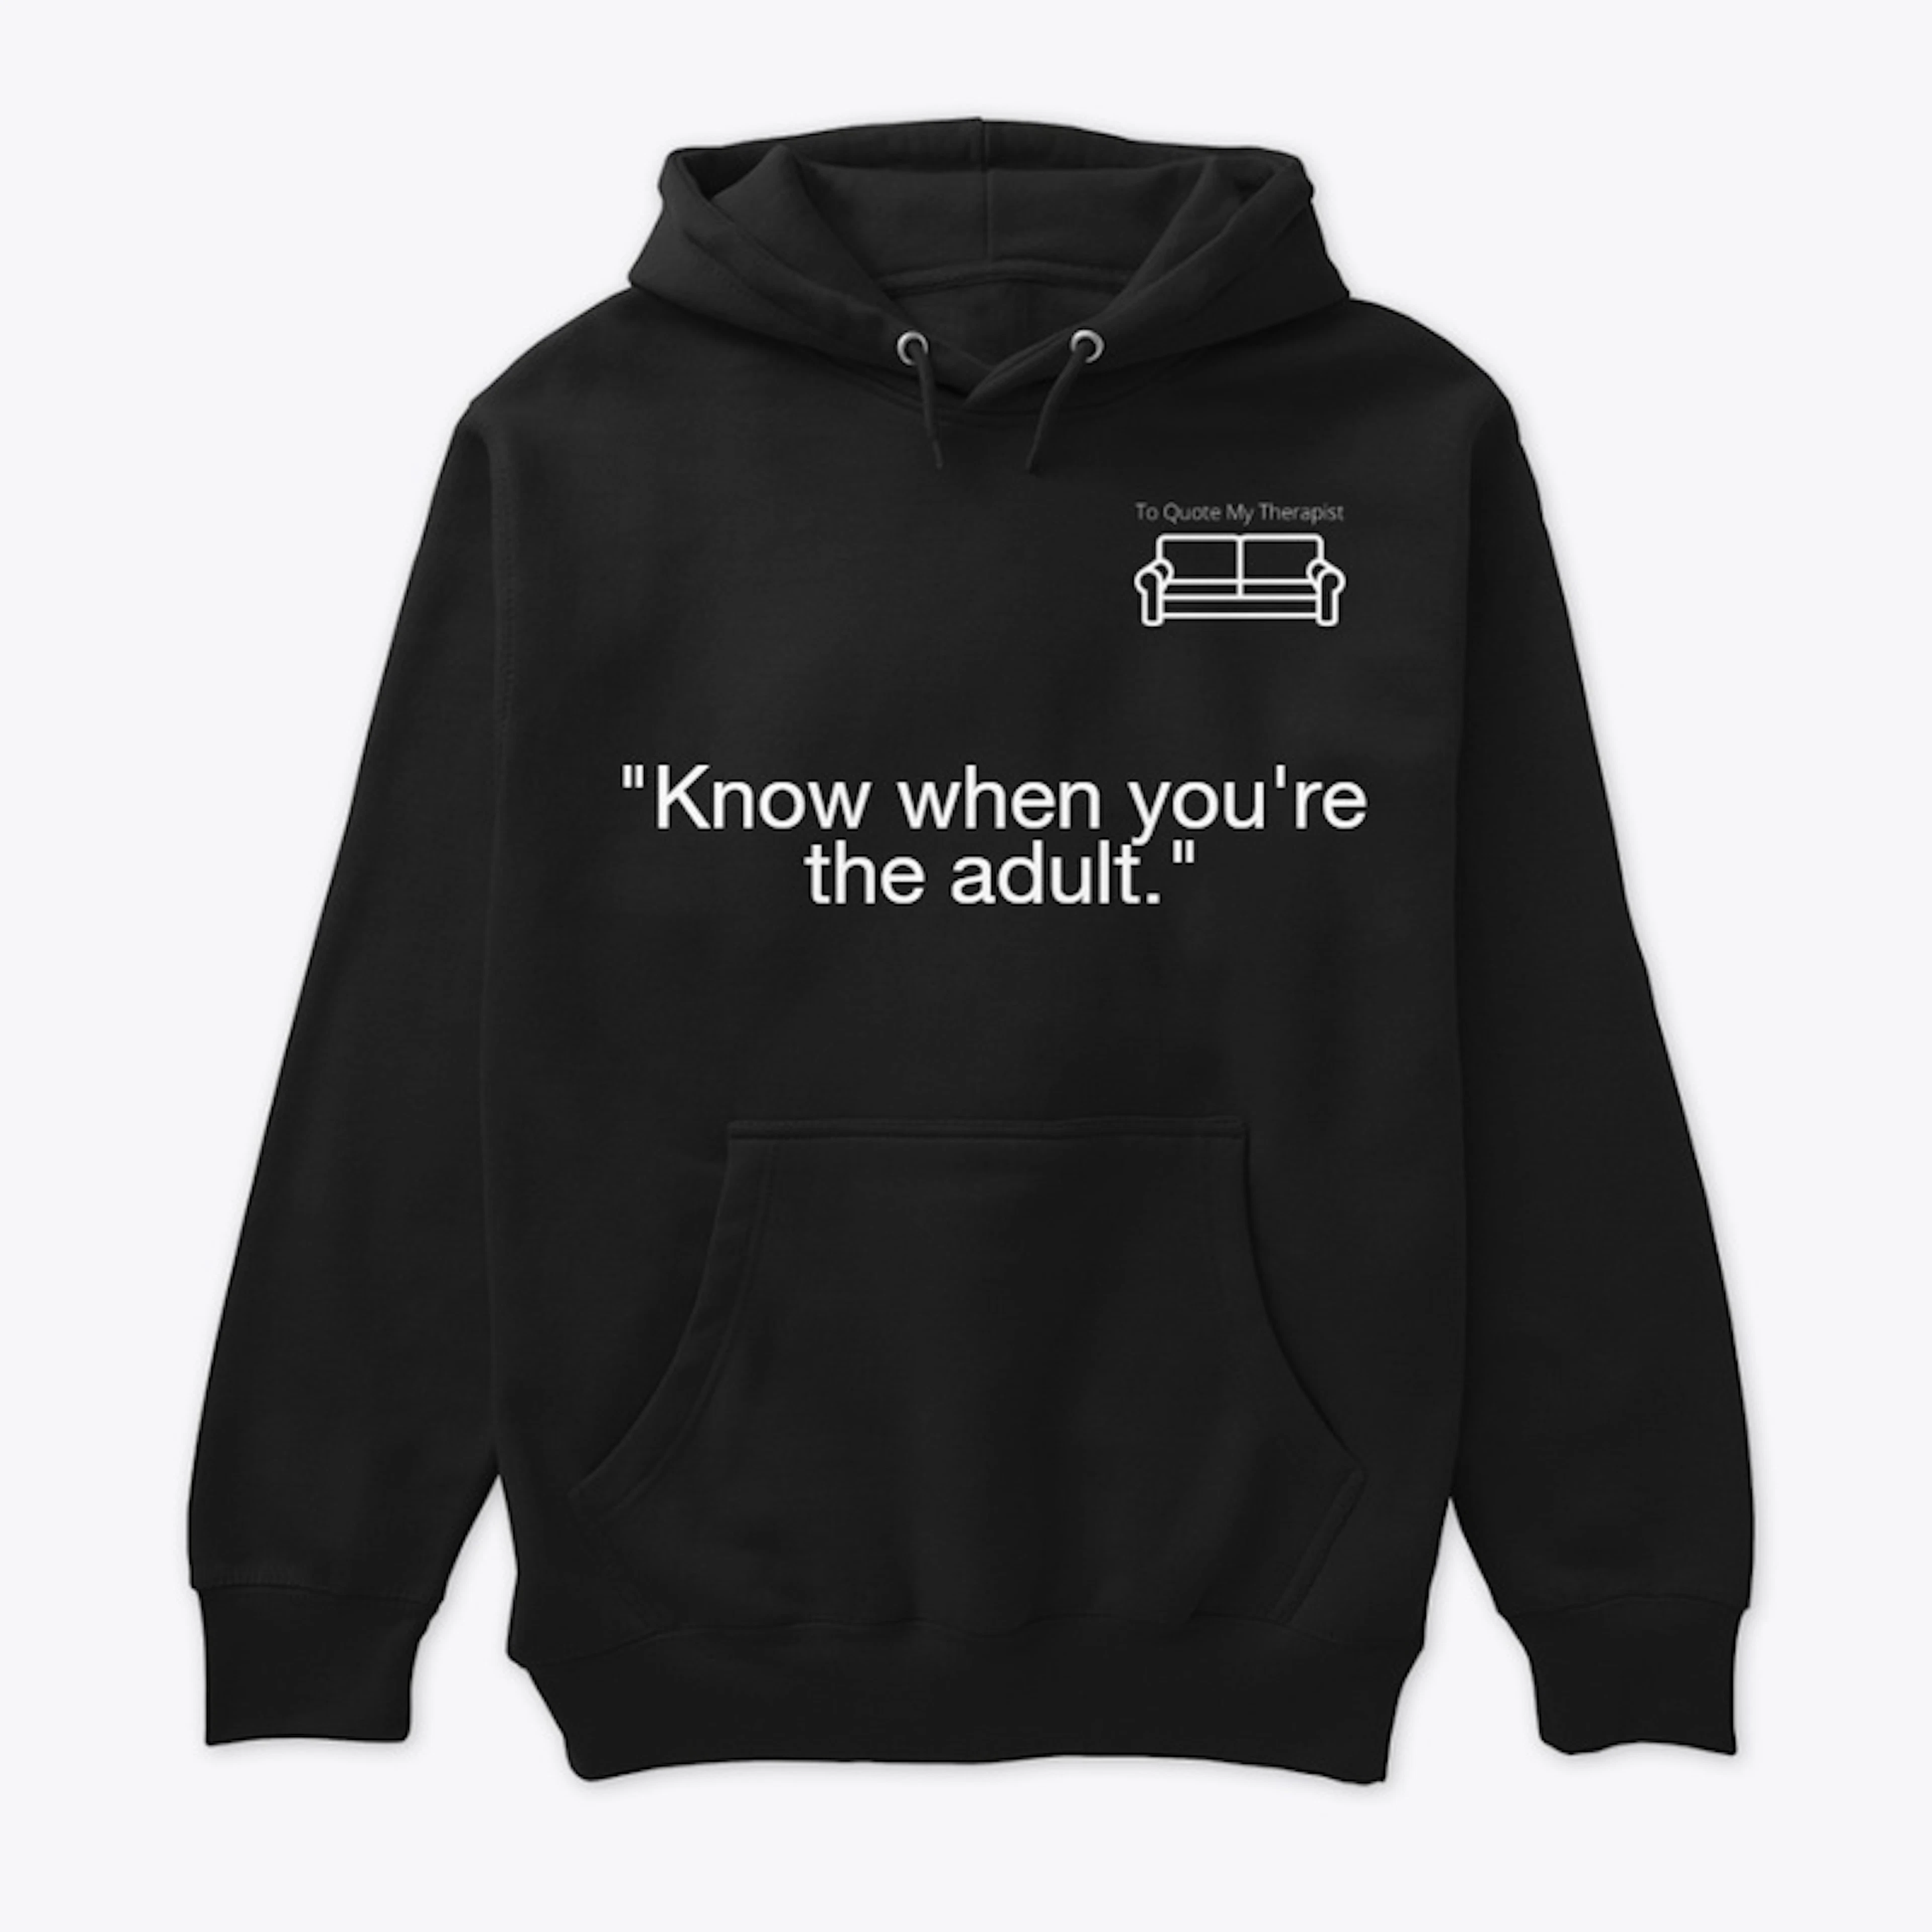 TQMT - "Know when you're the adult."